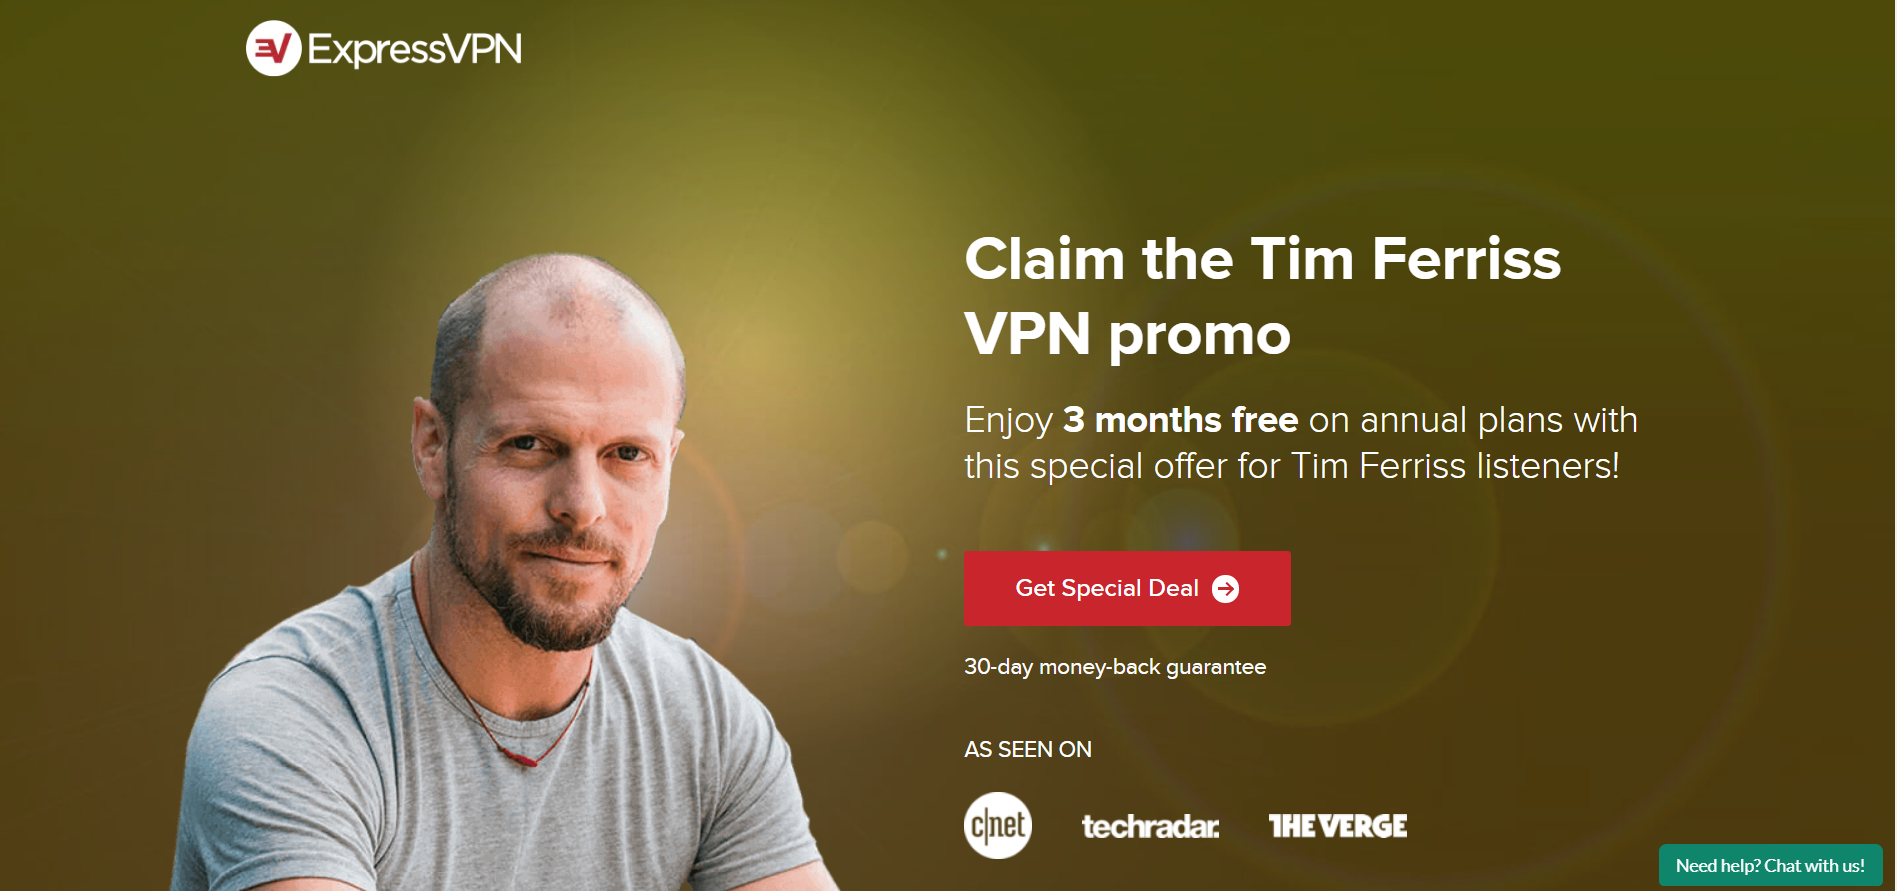 How To Get ExpressVPN with Tim Ferriss’s Discount (EASY)